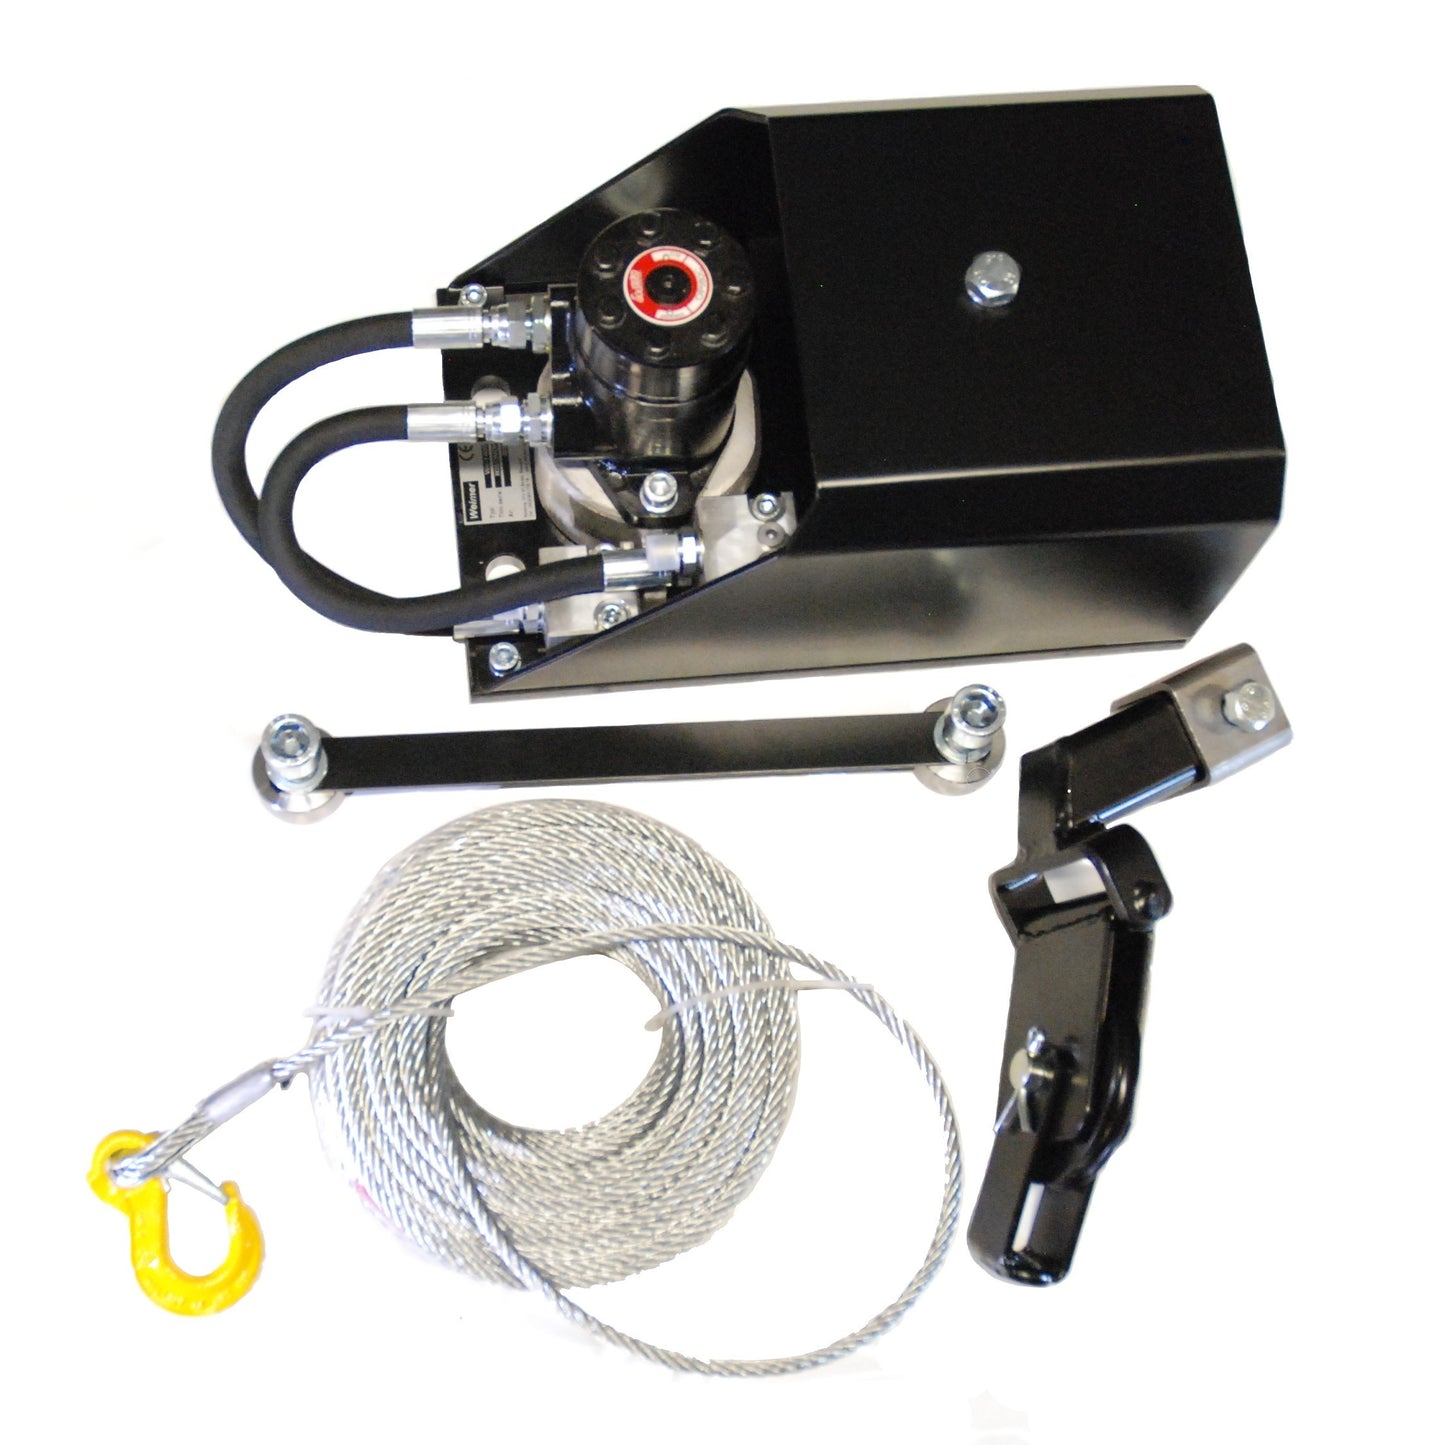 Winch We-1400 M3 excl. hose, valve and radio